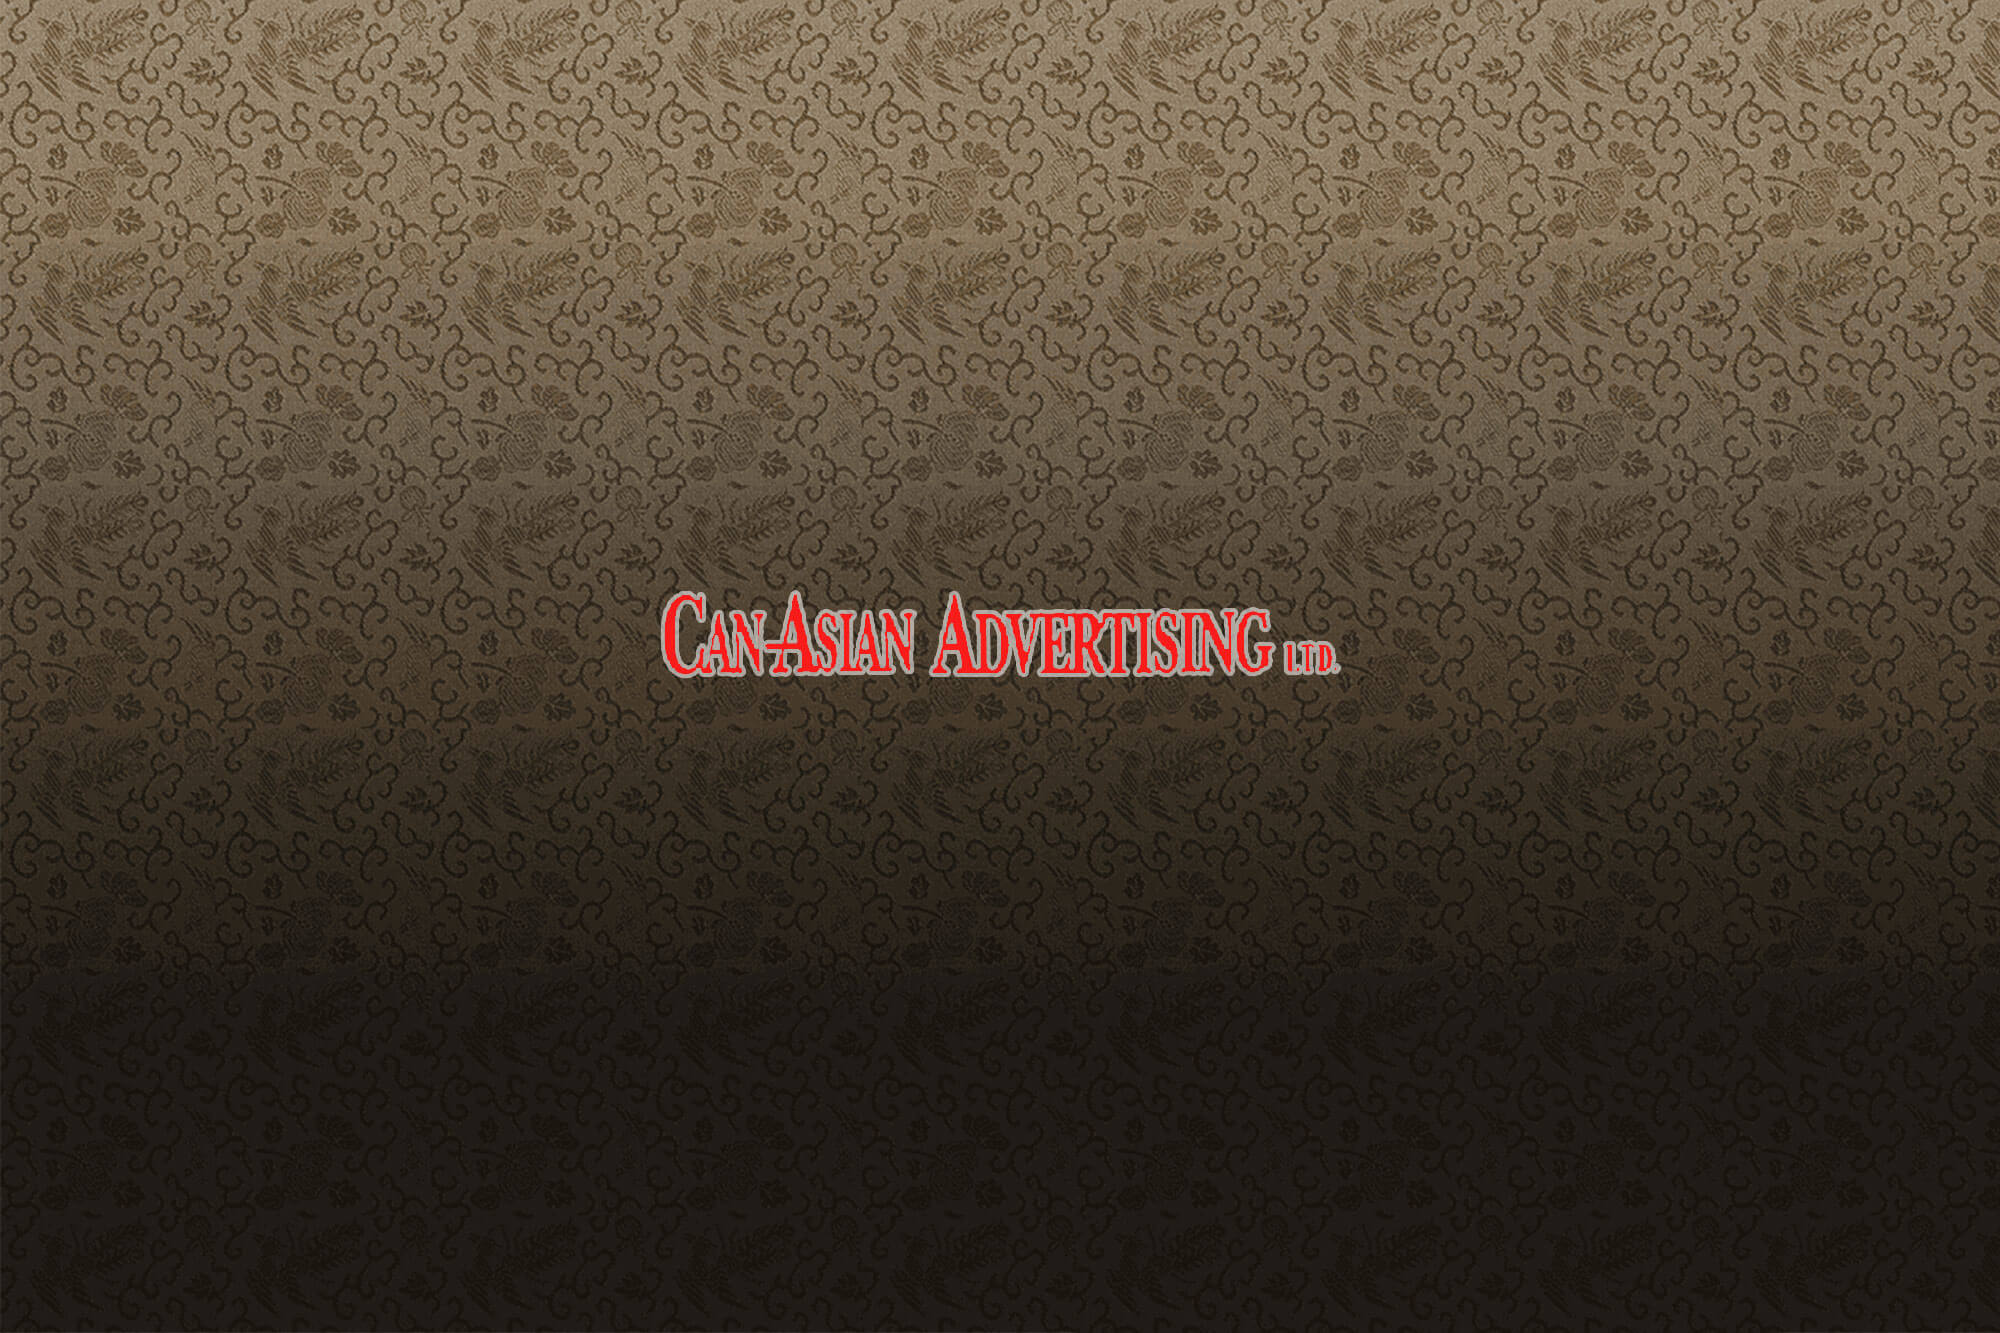 Can-Asia Advertising LTD.